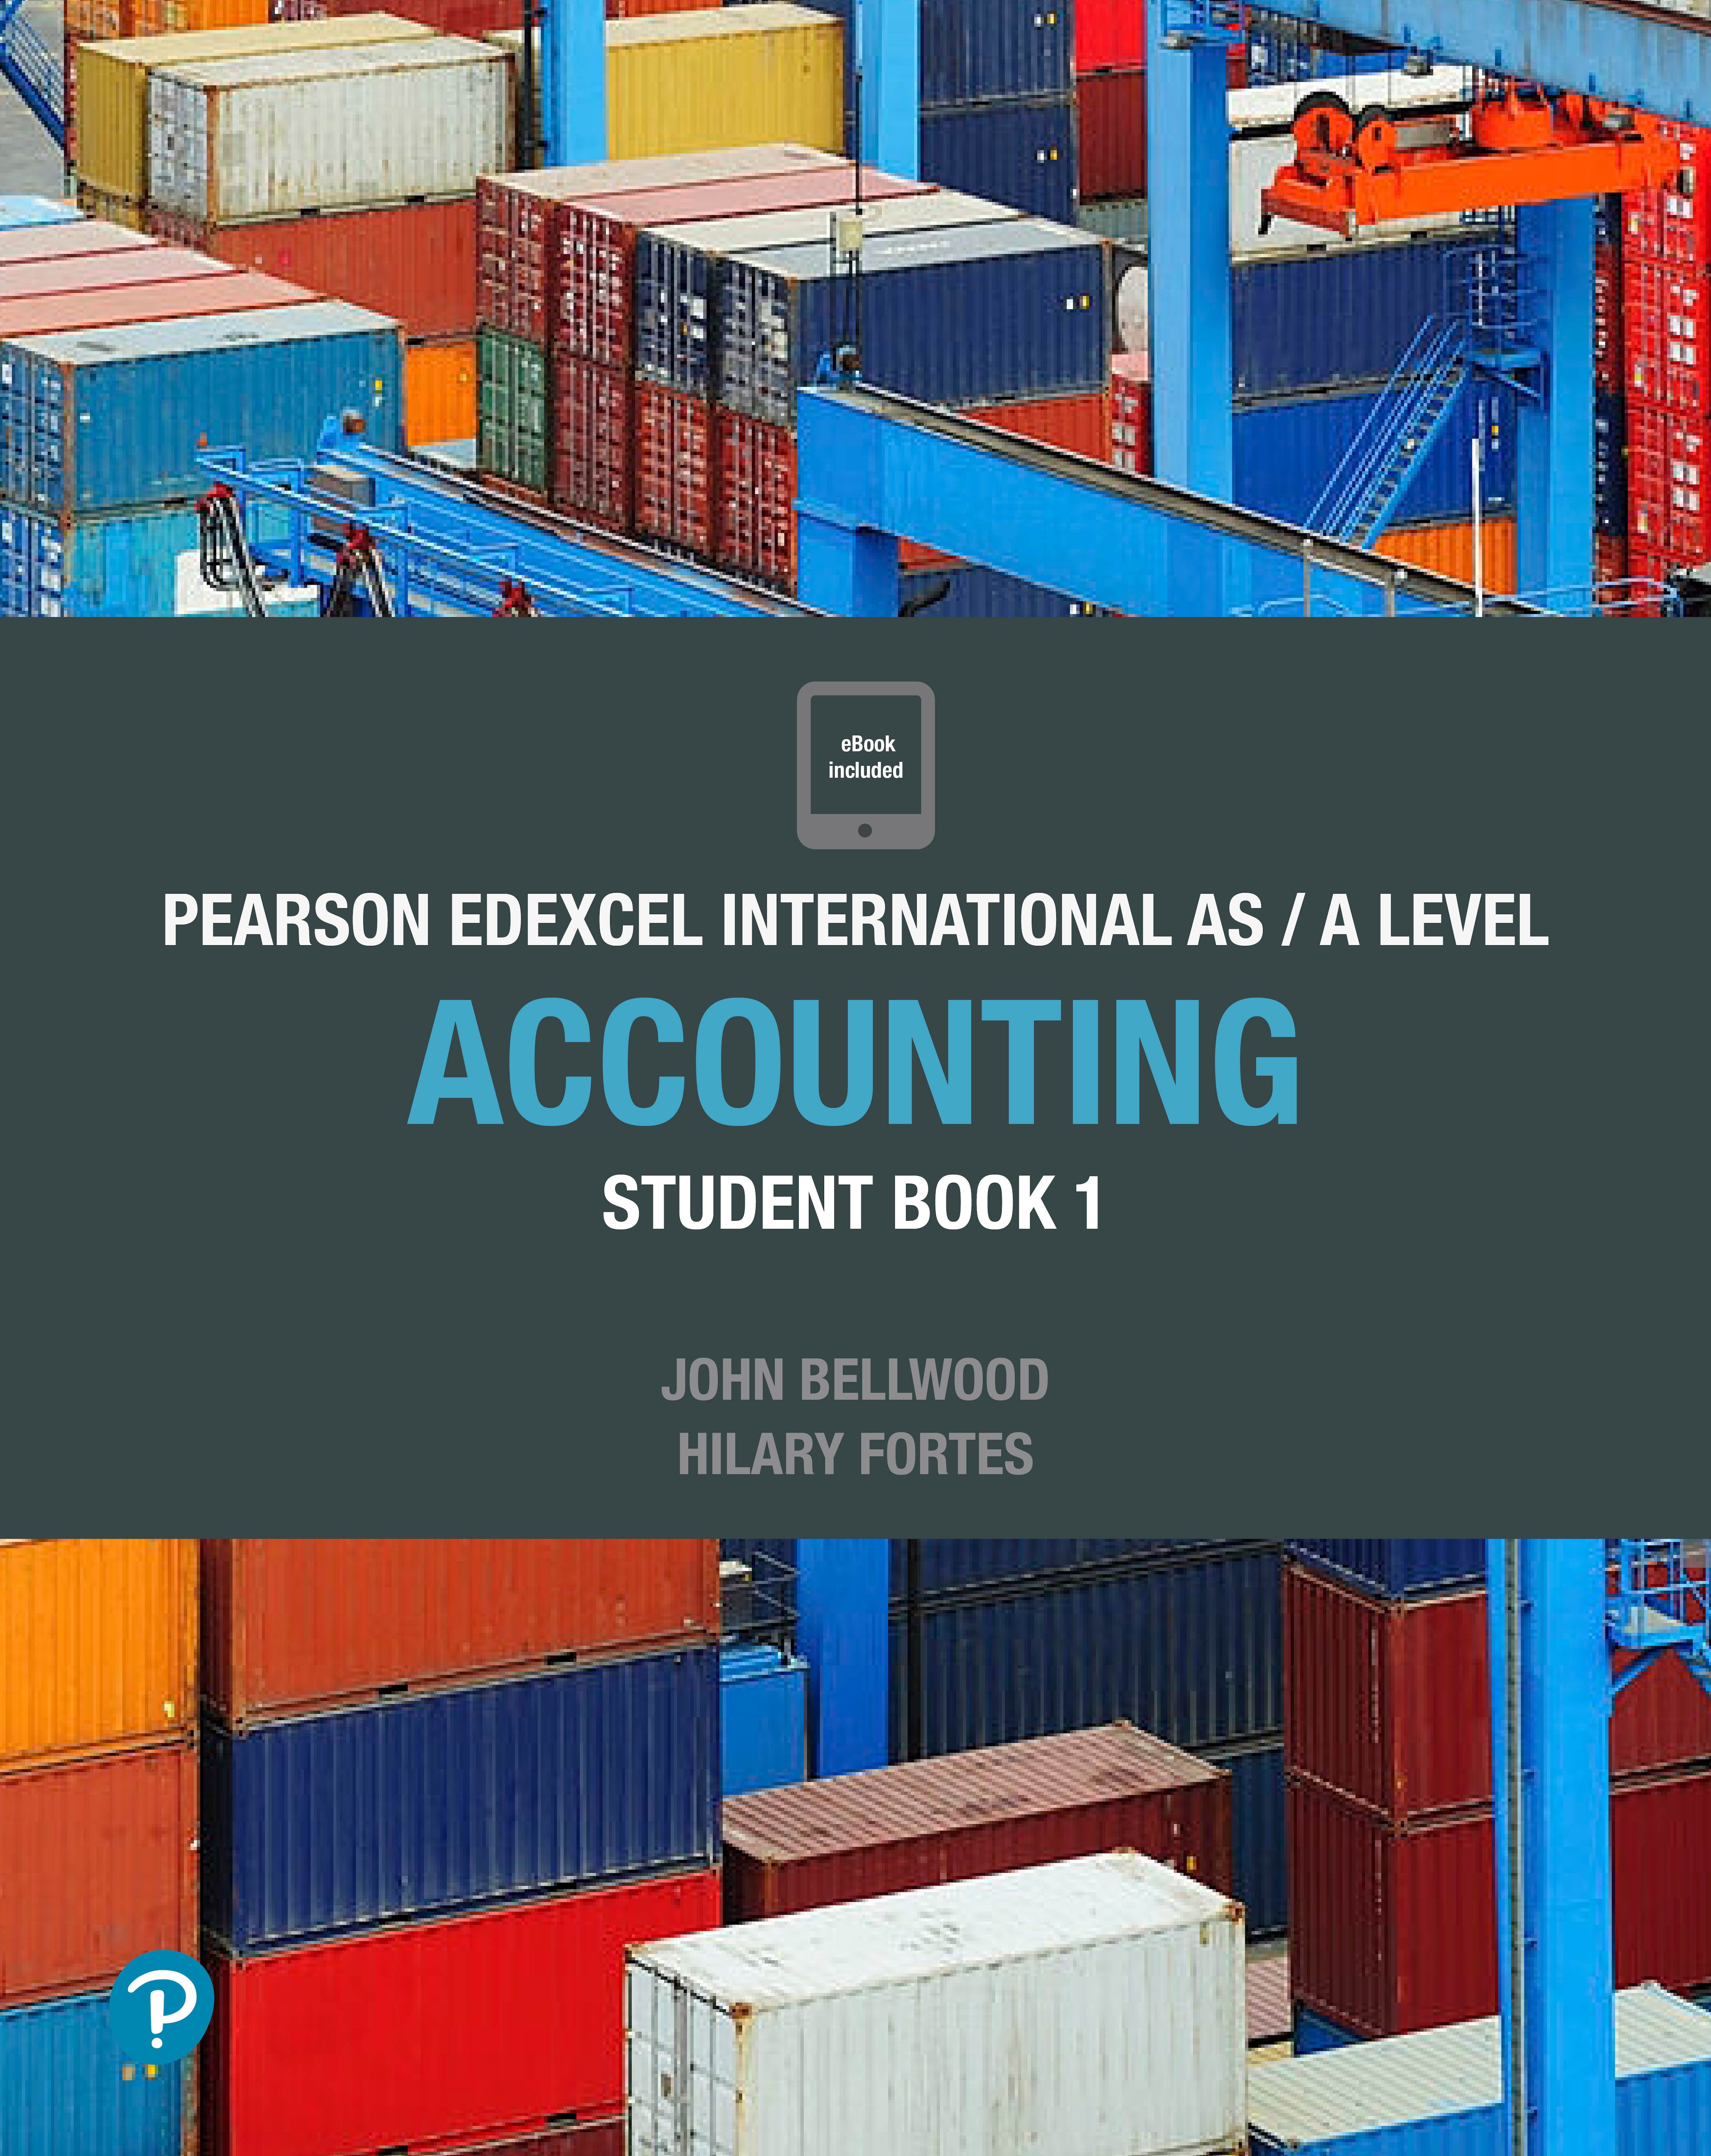 thesis about accounting pdf